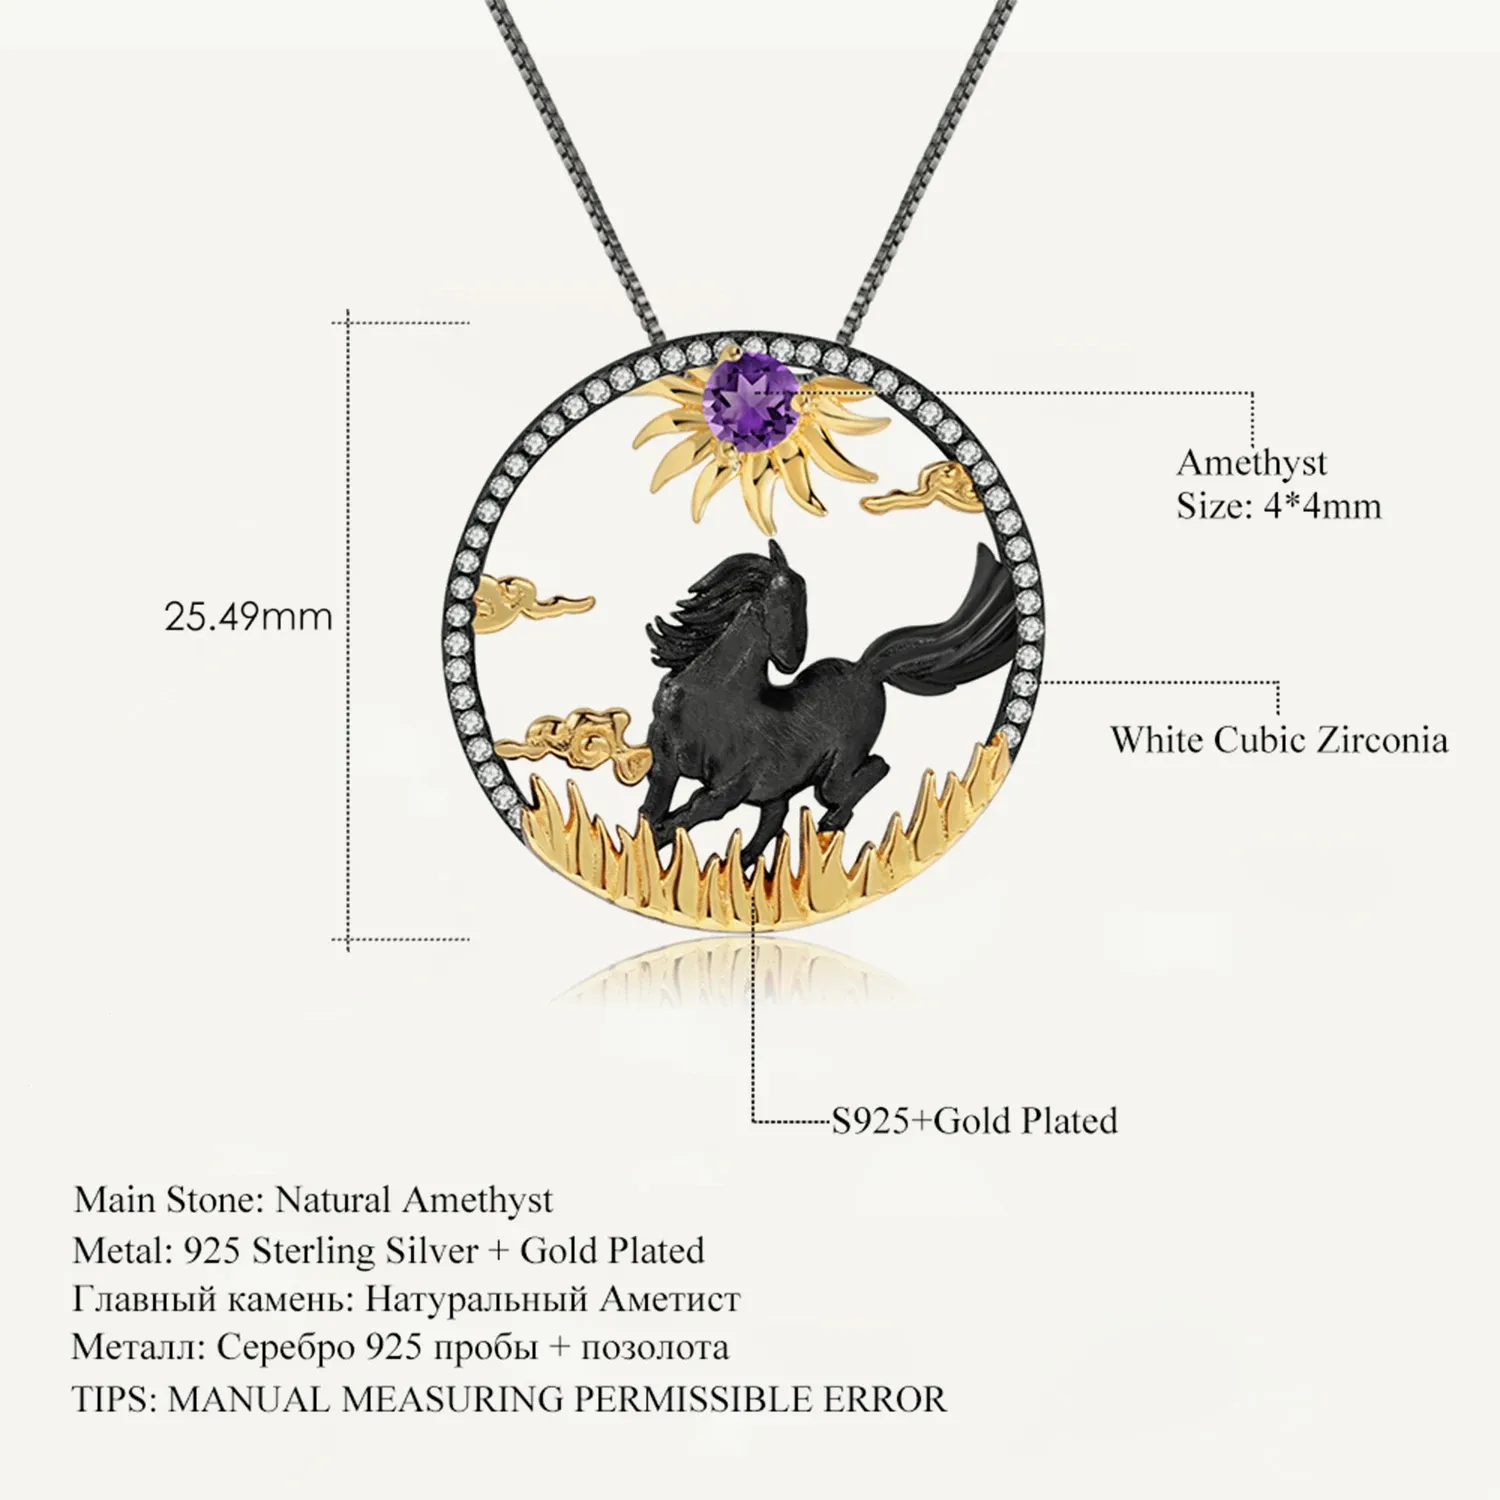 Necklaces GEM'S BALLET Natural Amethyst Gemstone Chinese Zodiac Jewelry 925 Sterling Silver Handmade Horse Pendant Necklace For Women